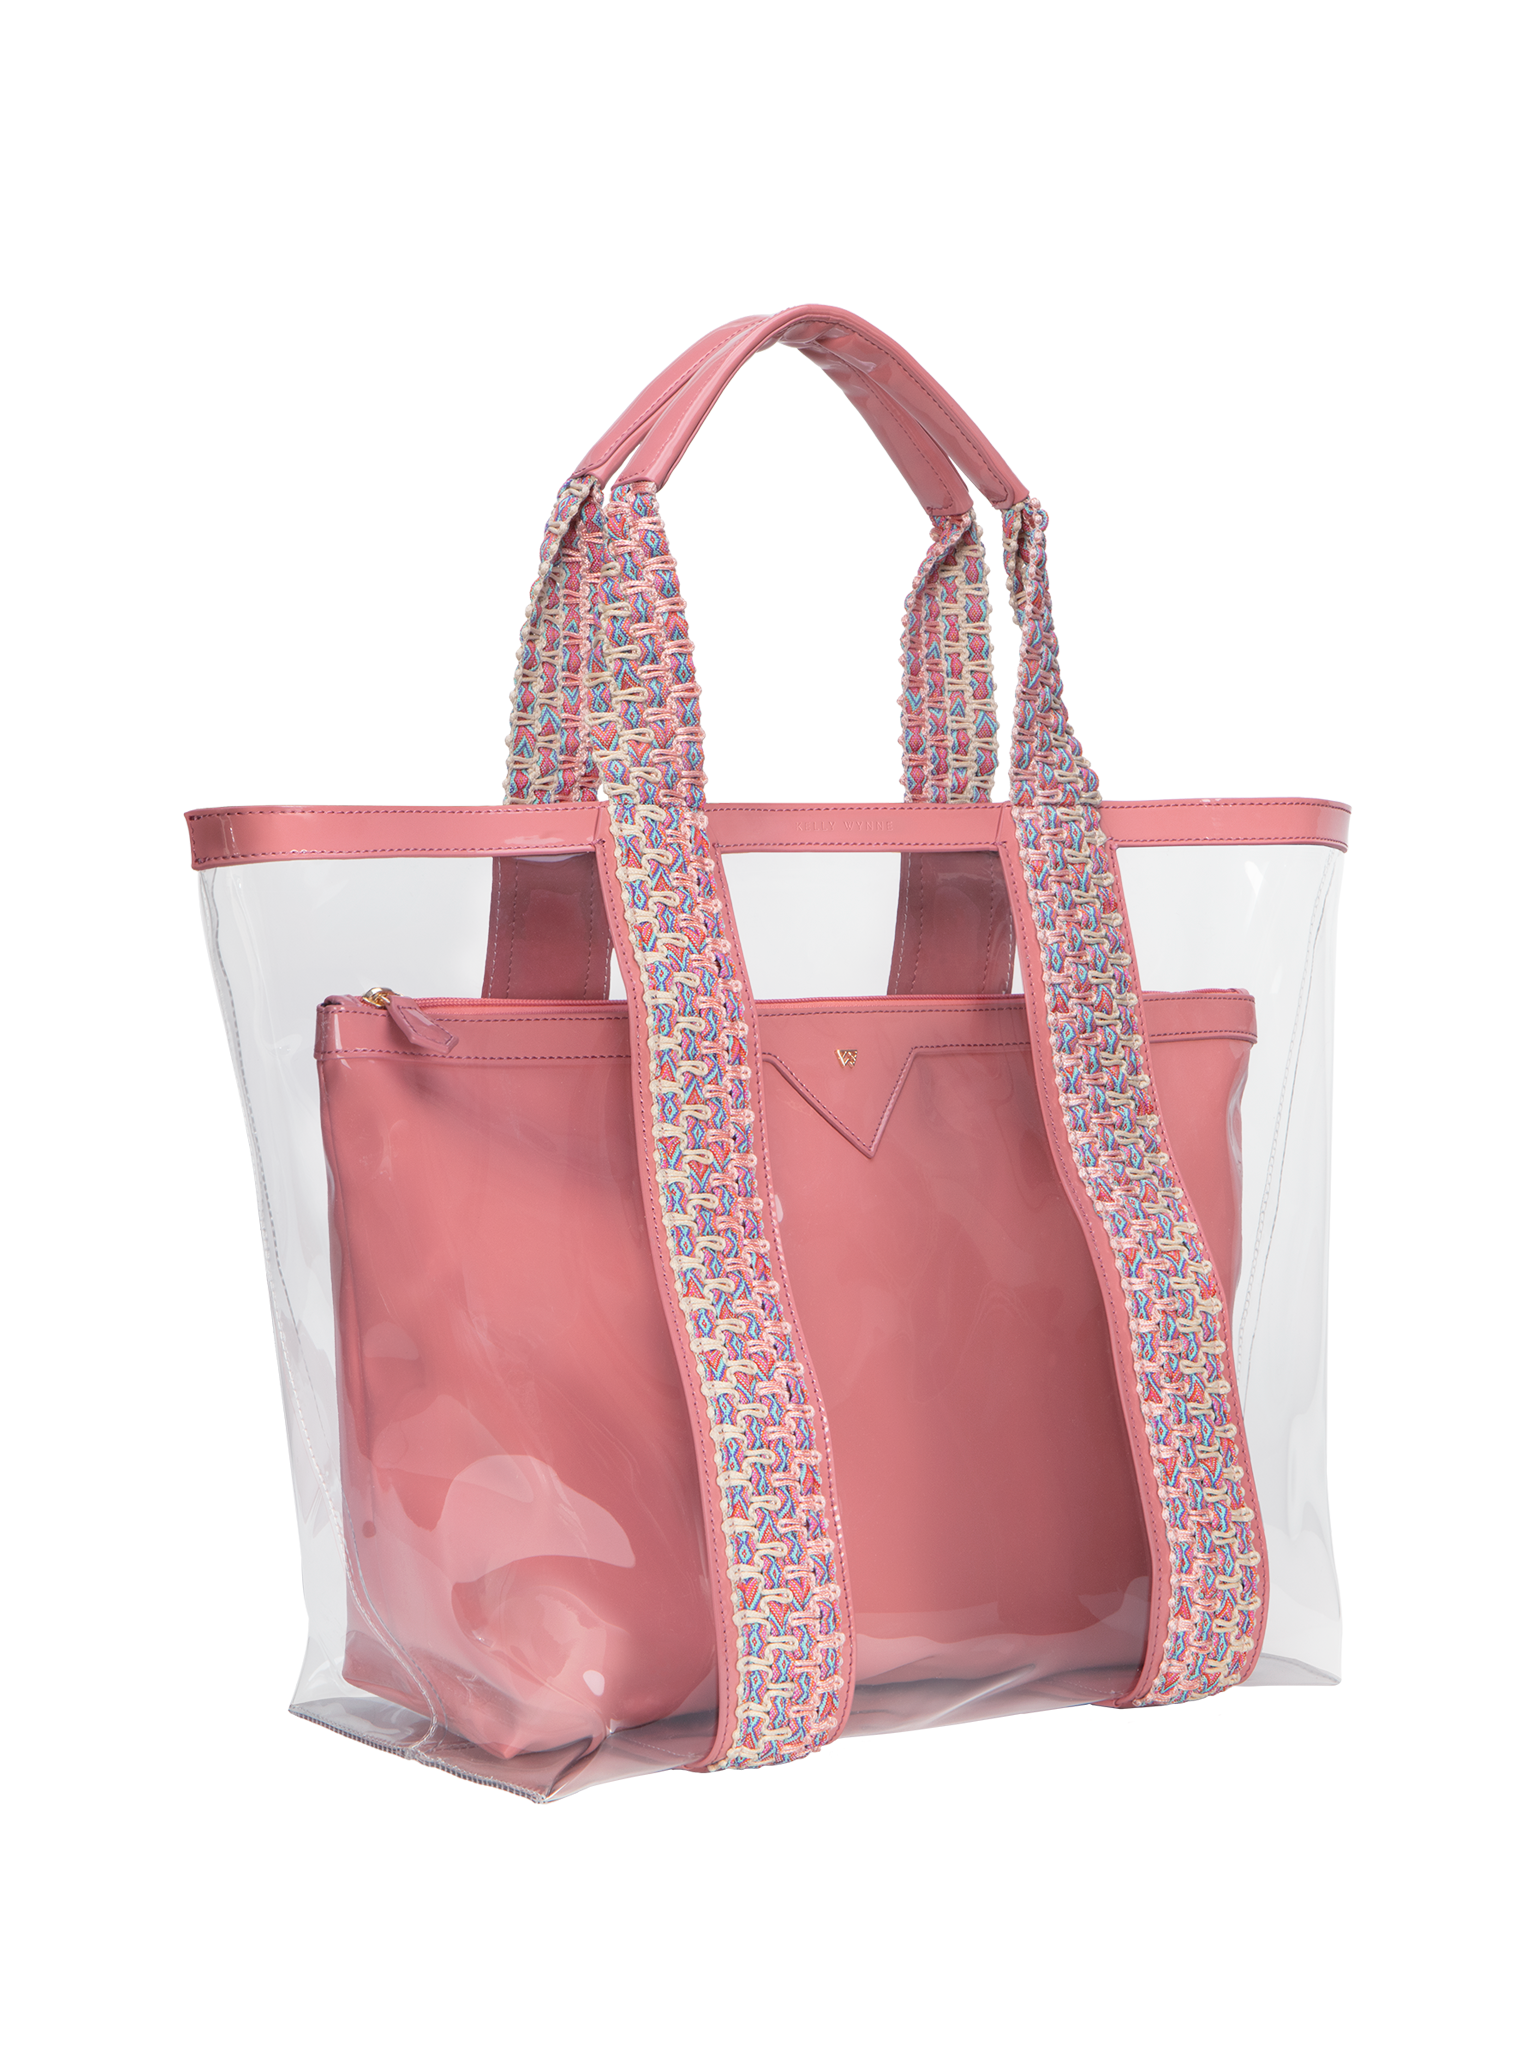 Clear exterior tote large enough to pack all your summer essentials. Waterproof material to make cleaning a breeze. Removable interior pouch made with water resistant vegan leather in dusty pink 